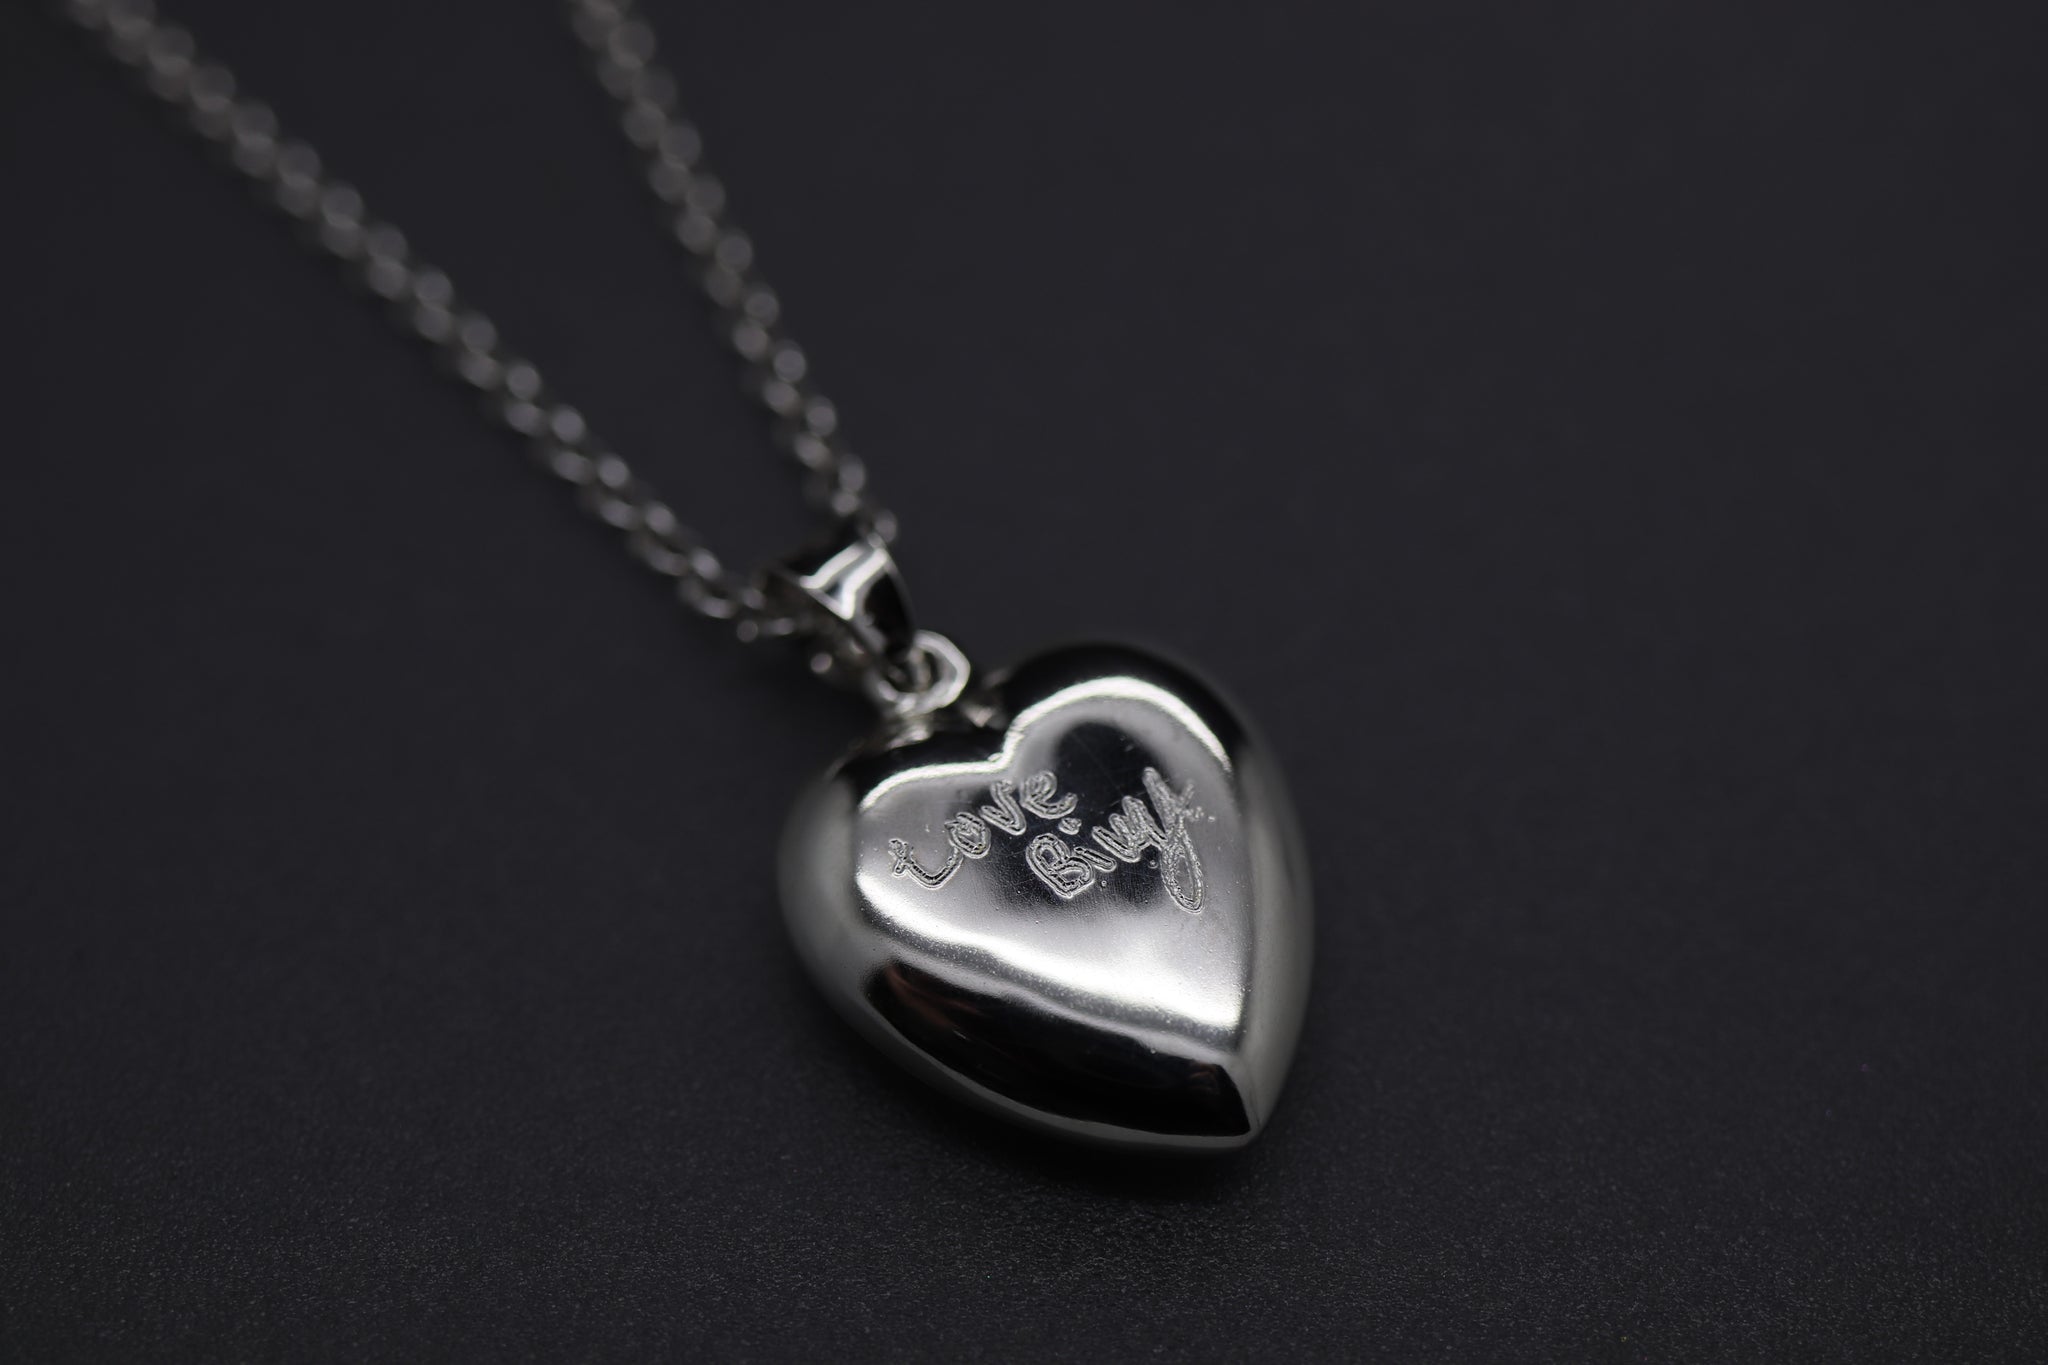 Buy LAOFU Couples Broken Heart Necklace Engraving Name Necklace  Personalized Jewelry Customized with Any Name (Silver) at Amazon.in